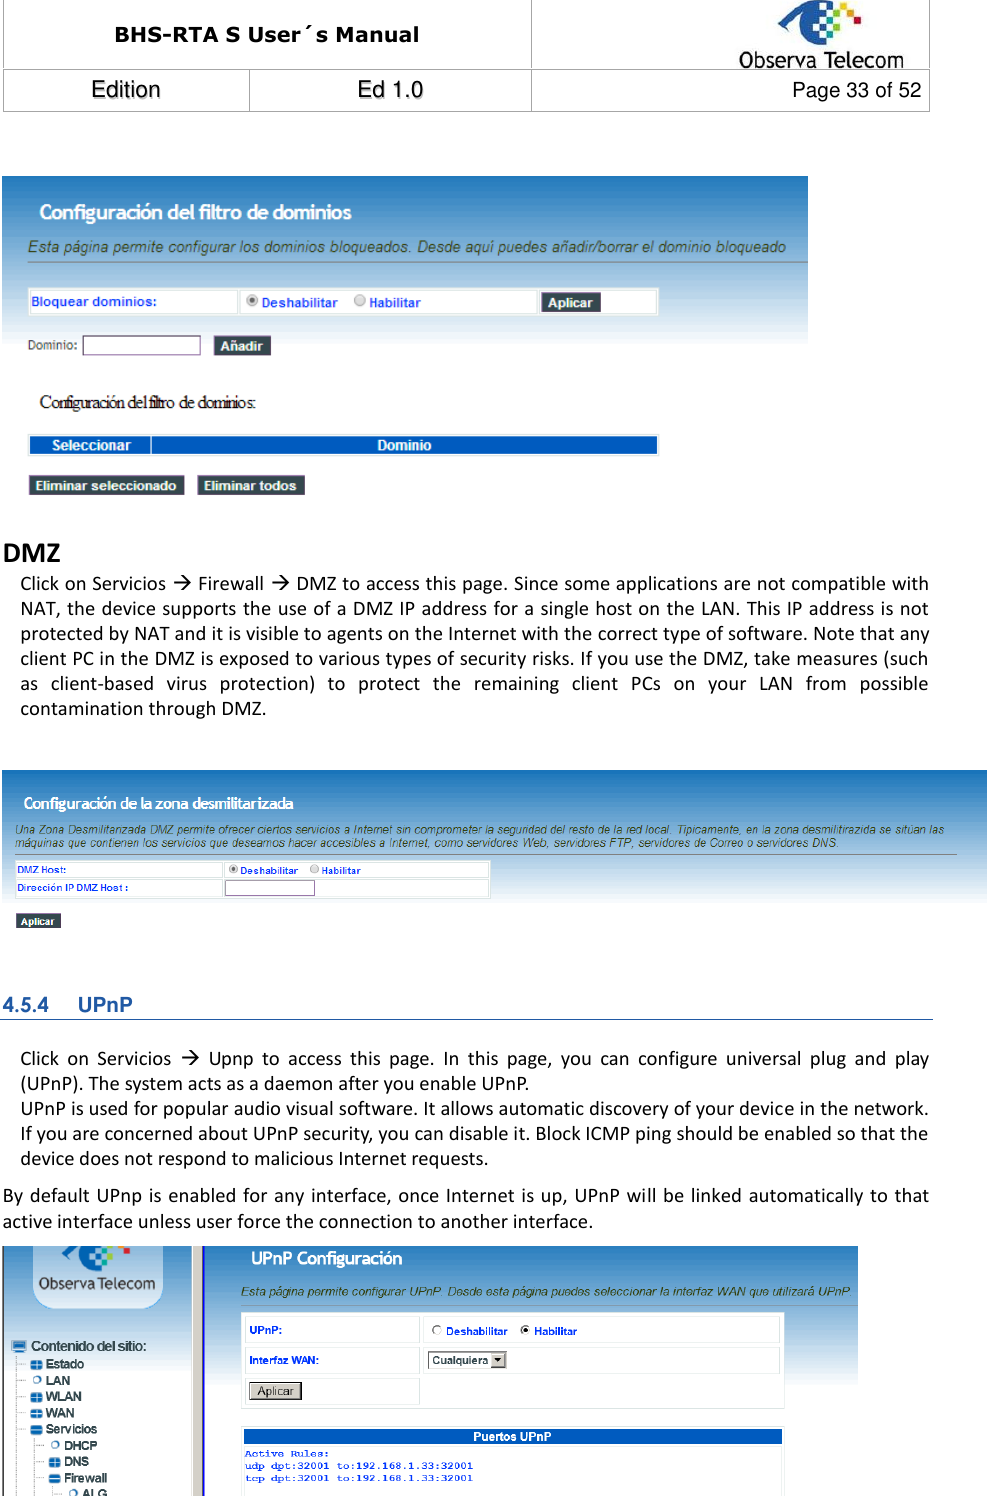 BHS-RTA S User´s Manual  EEddiittiioonn  EEdd  11..00  Page 33 of 52    DMZ Click on Servicios  Firewall  DMZ to access this page. Since some applications are not compatible with NAT, the device supports the use of a DMZ IP address for a single host on the LAN. This IP address is not protected by NAT and it is visible to agents on the Internet with the correct type of software. Note that any client PC in the DMZ is exposed to various types of security risks. If you use the DMZ, take measures (such as  client-based  virus  protection)  to  protect  the  remaining  client  PCs  on  your  LAN  from  possible contamination through DMZ.   4.5.4 UPnP Click  on  Servicios    Upnp  to  access  this  page.  In  this  page,  you  can  configure  universal  plug  and  play (UPnP). The system acts as a daemon after you enable UPnP. UPnP is used for popular audio visual software. It allows automatic discovery of your device in the network. If you are concerned about UPnP security, you can disable it. Block ICMP ping should be enabled so that the device does not respond to malicious Internet requests. By default UPnp is  enabled for any interface, once Internet is up, UPnP will be linked automatically to that active interface unless user force the connection to another interface.   